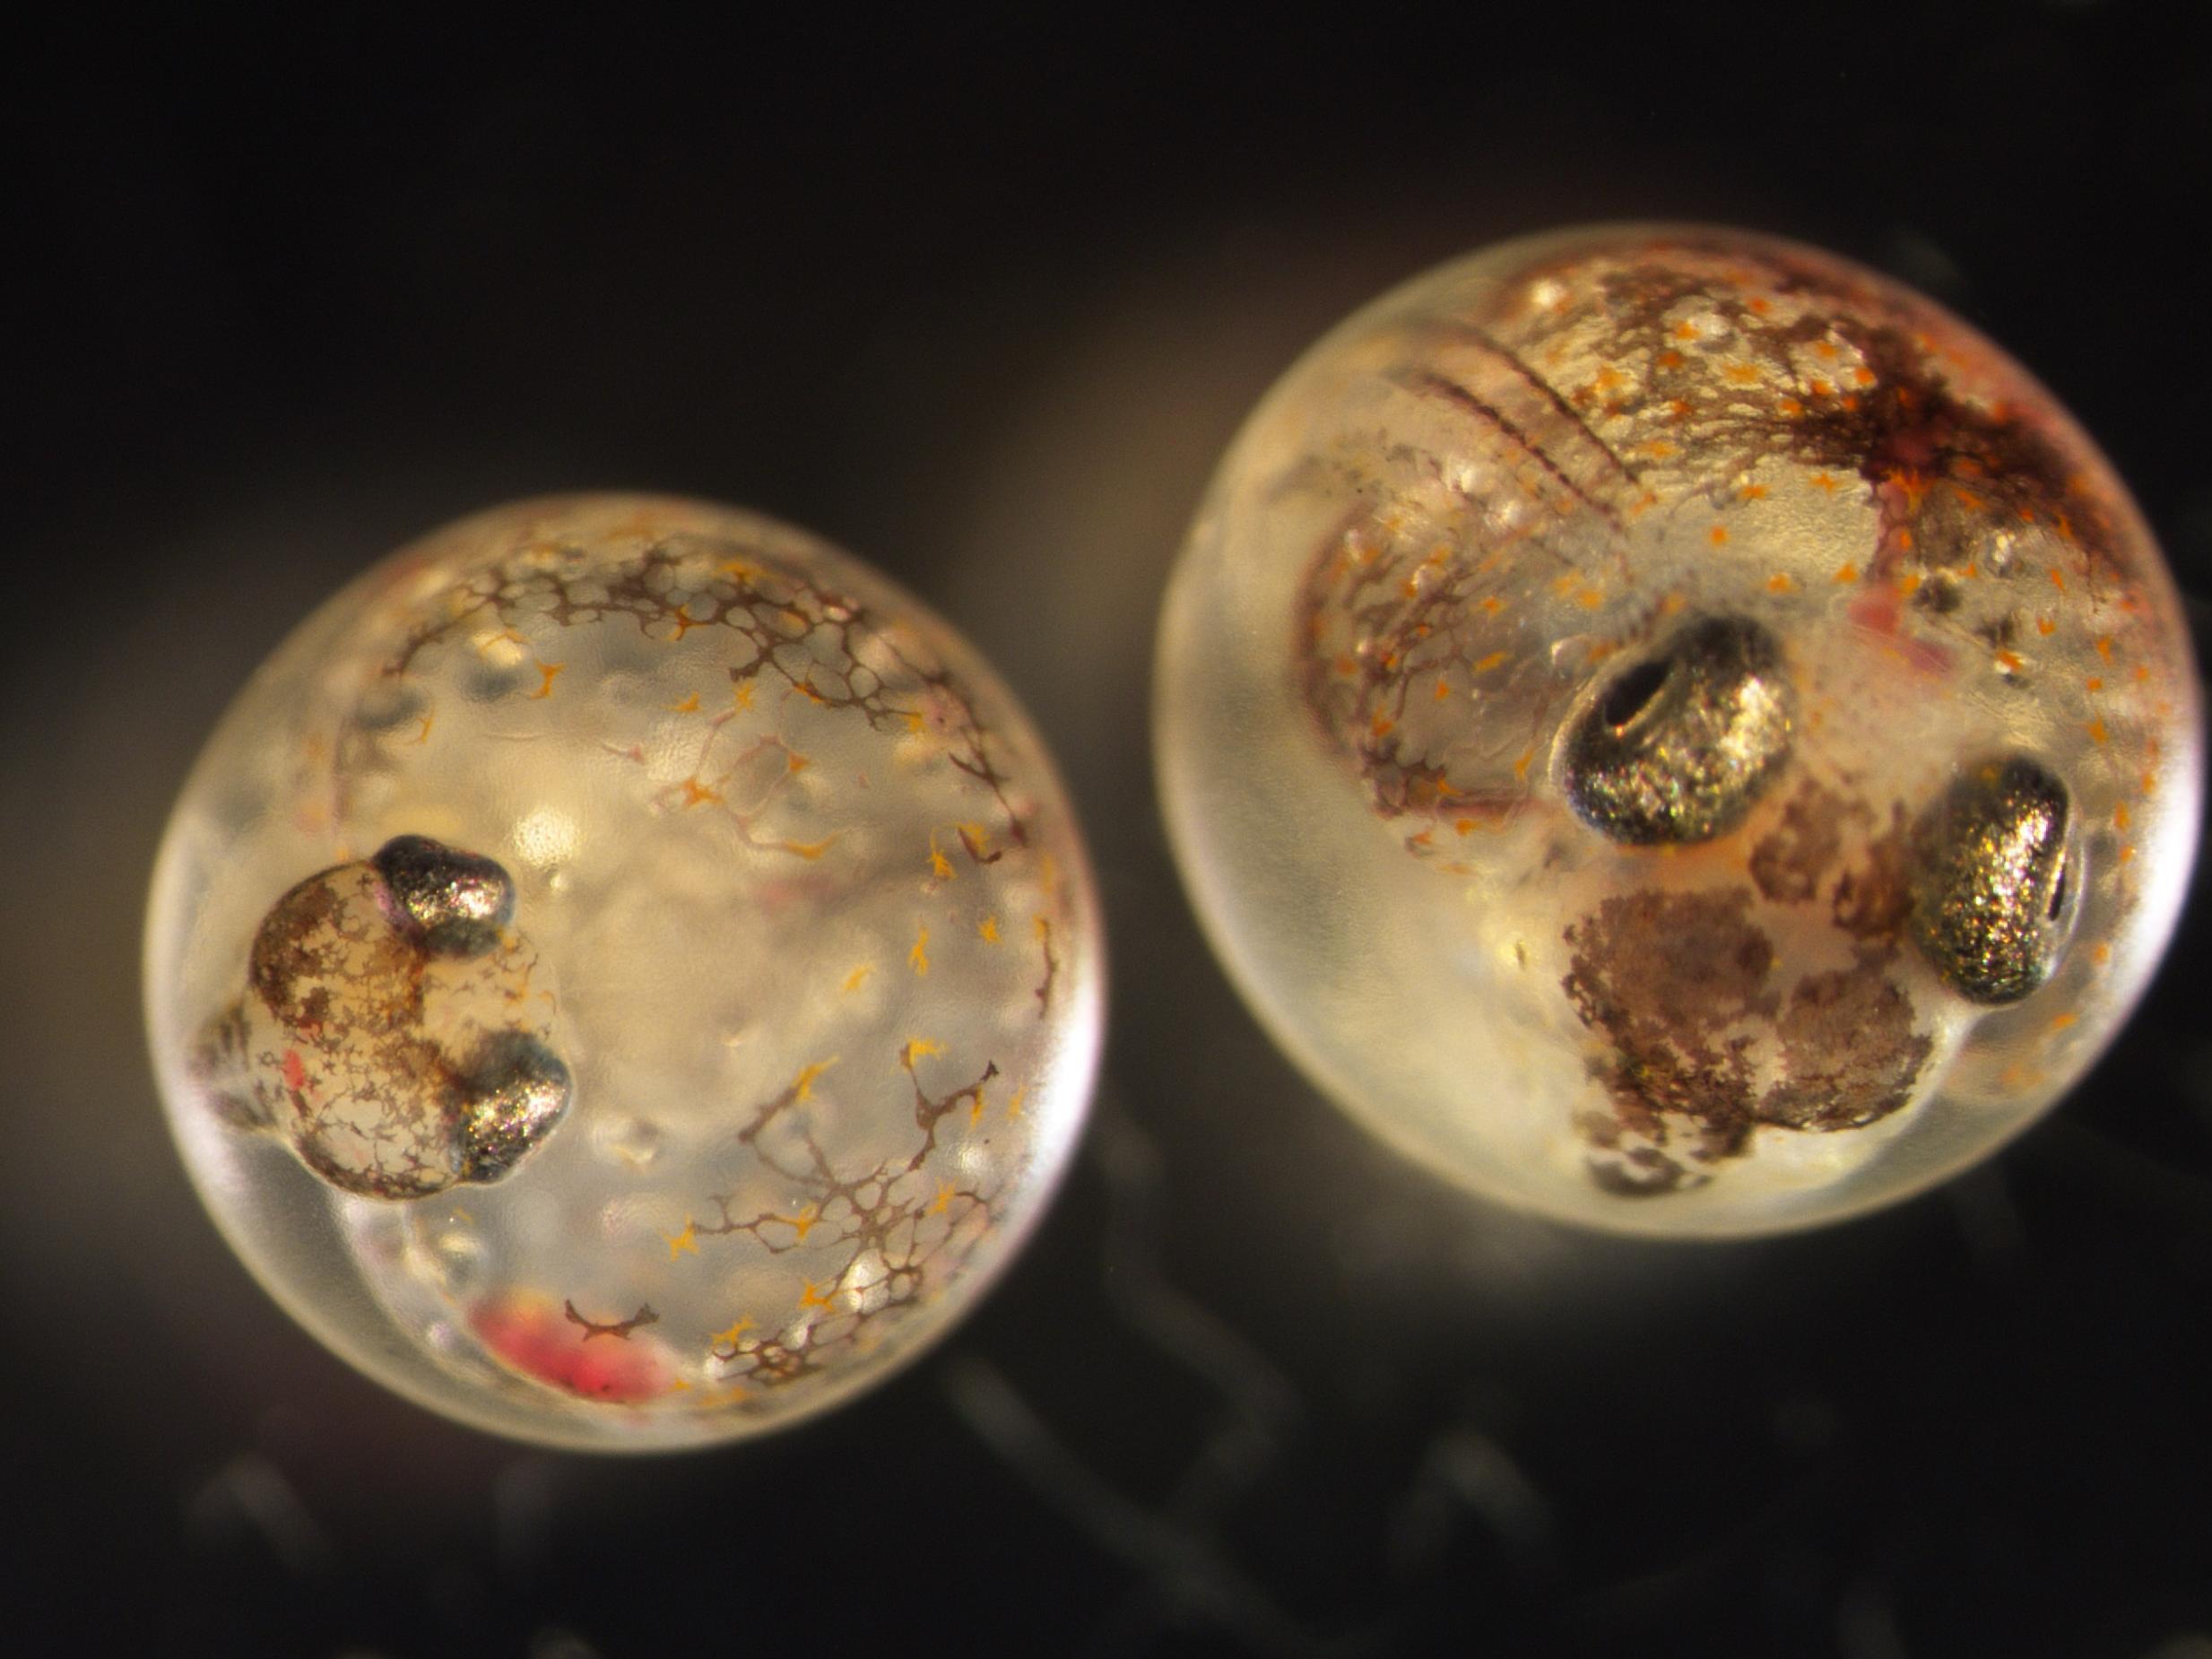 Five-day old Gulf killifish embryos. The embryo on the right is from the pollution-tolerant population and its heart has developed properly.